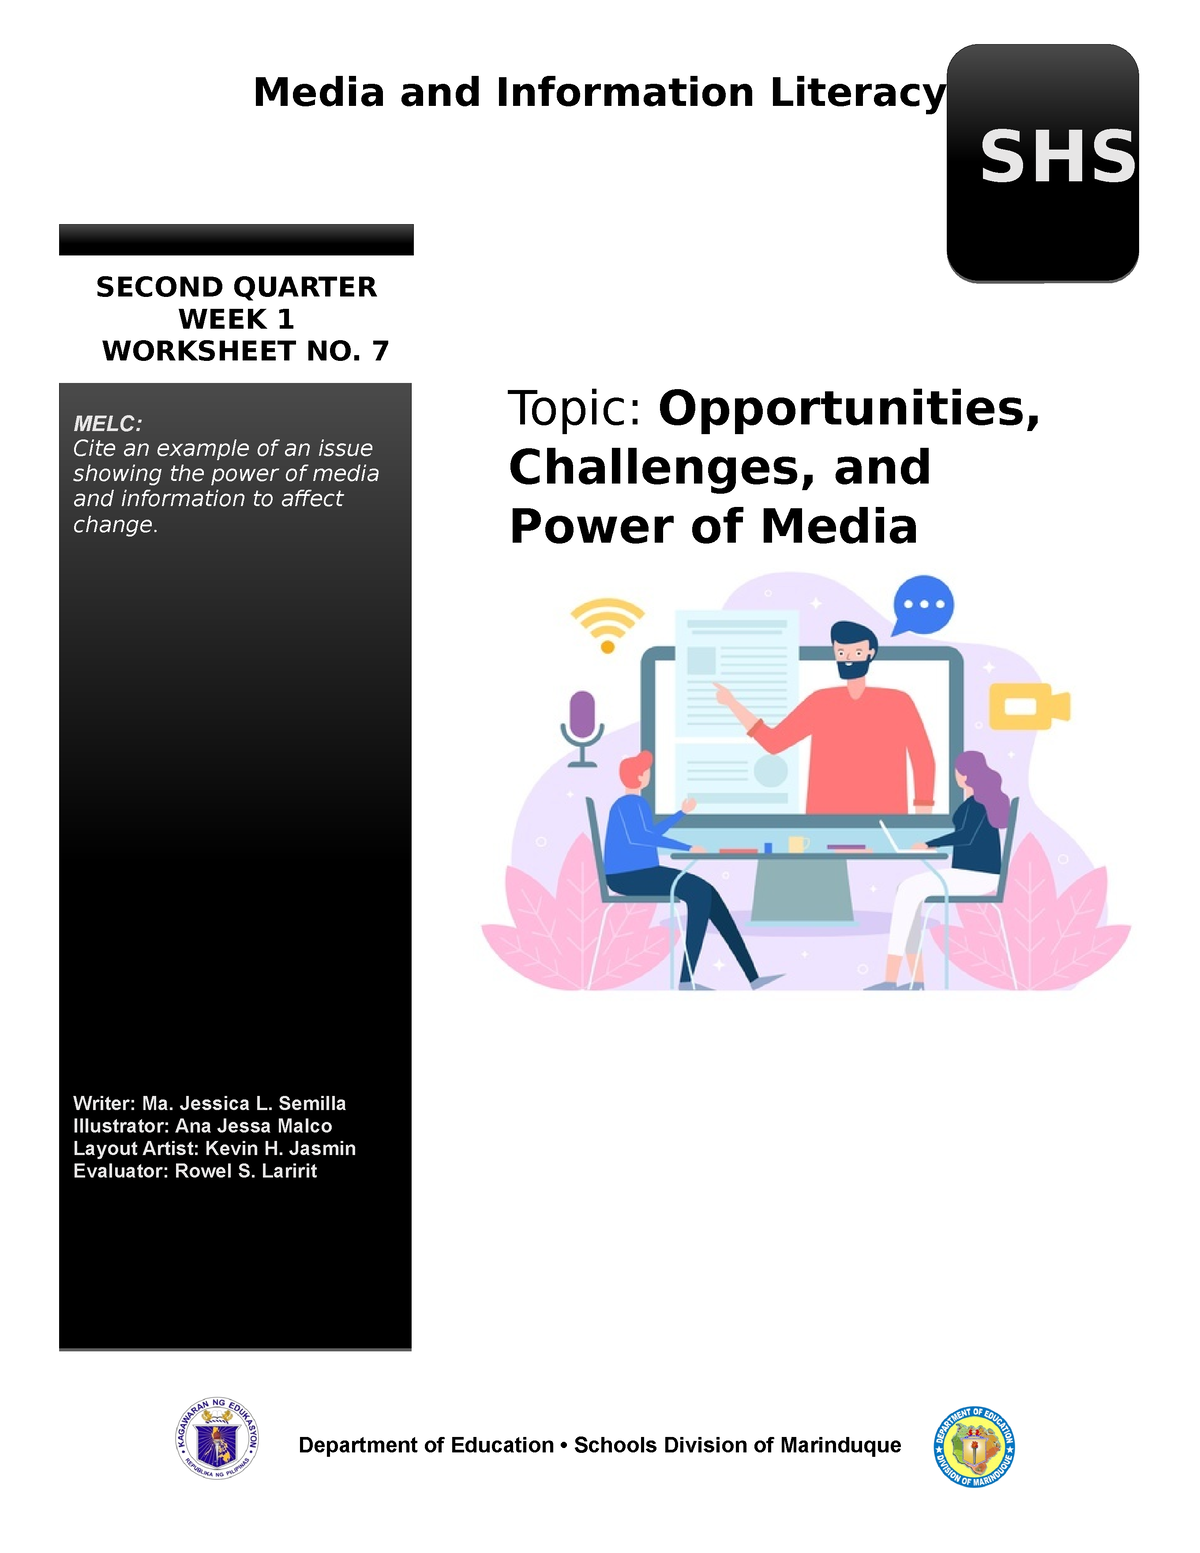 opportunities challenges and power of media and information essay